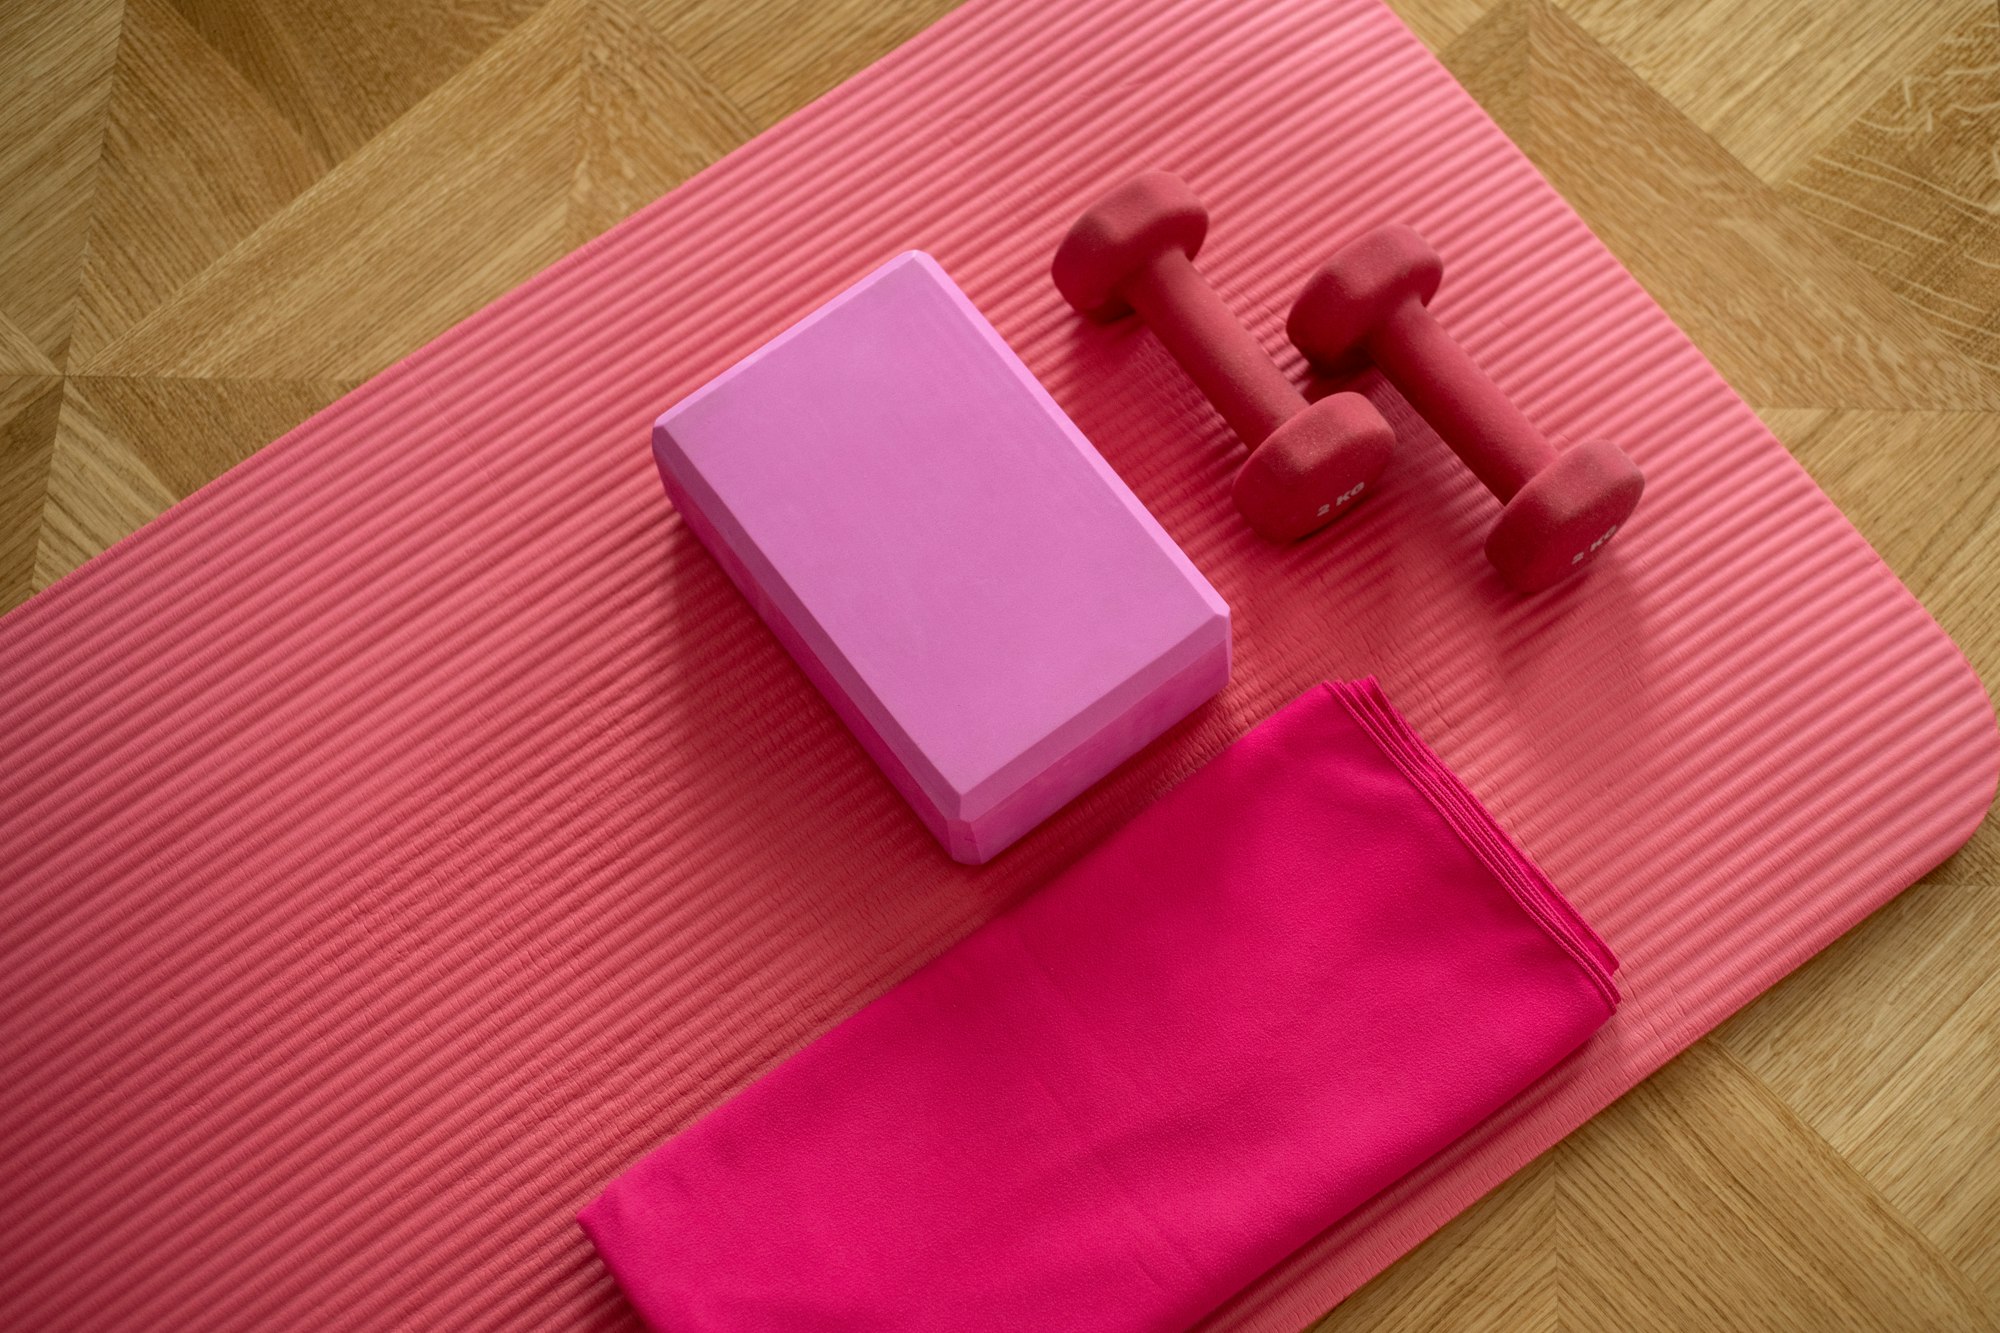 A pink exercise mat with weights on top of it